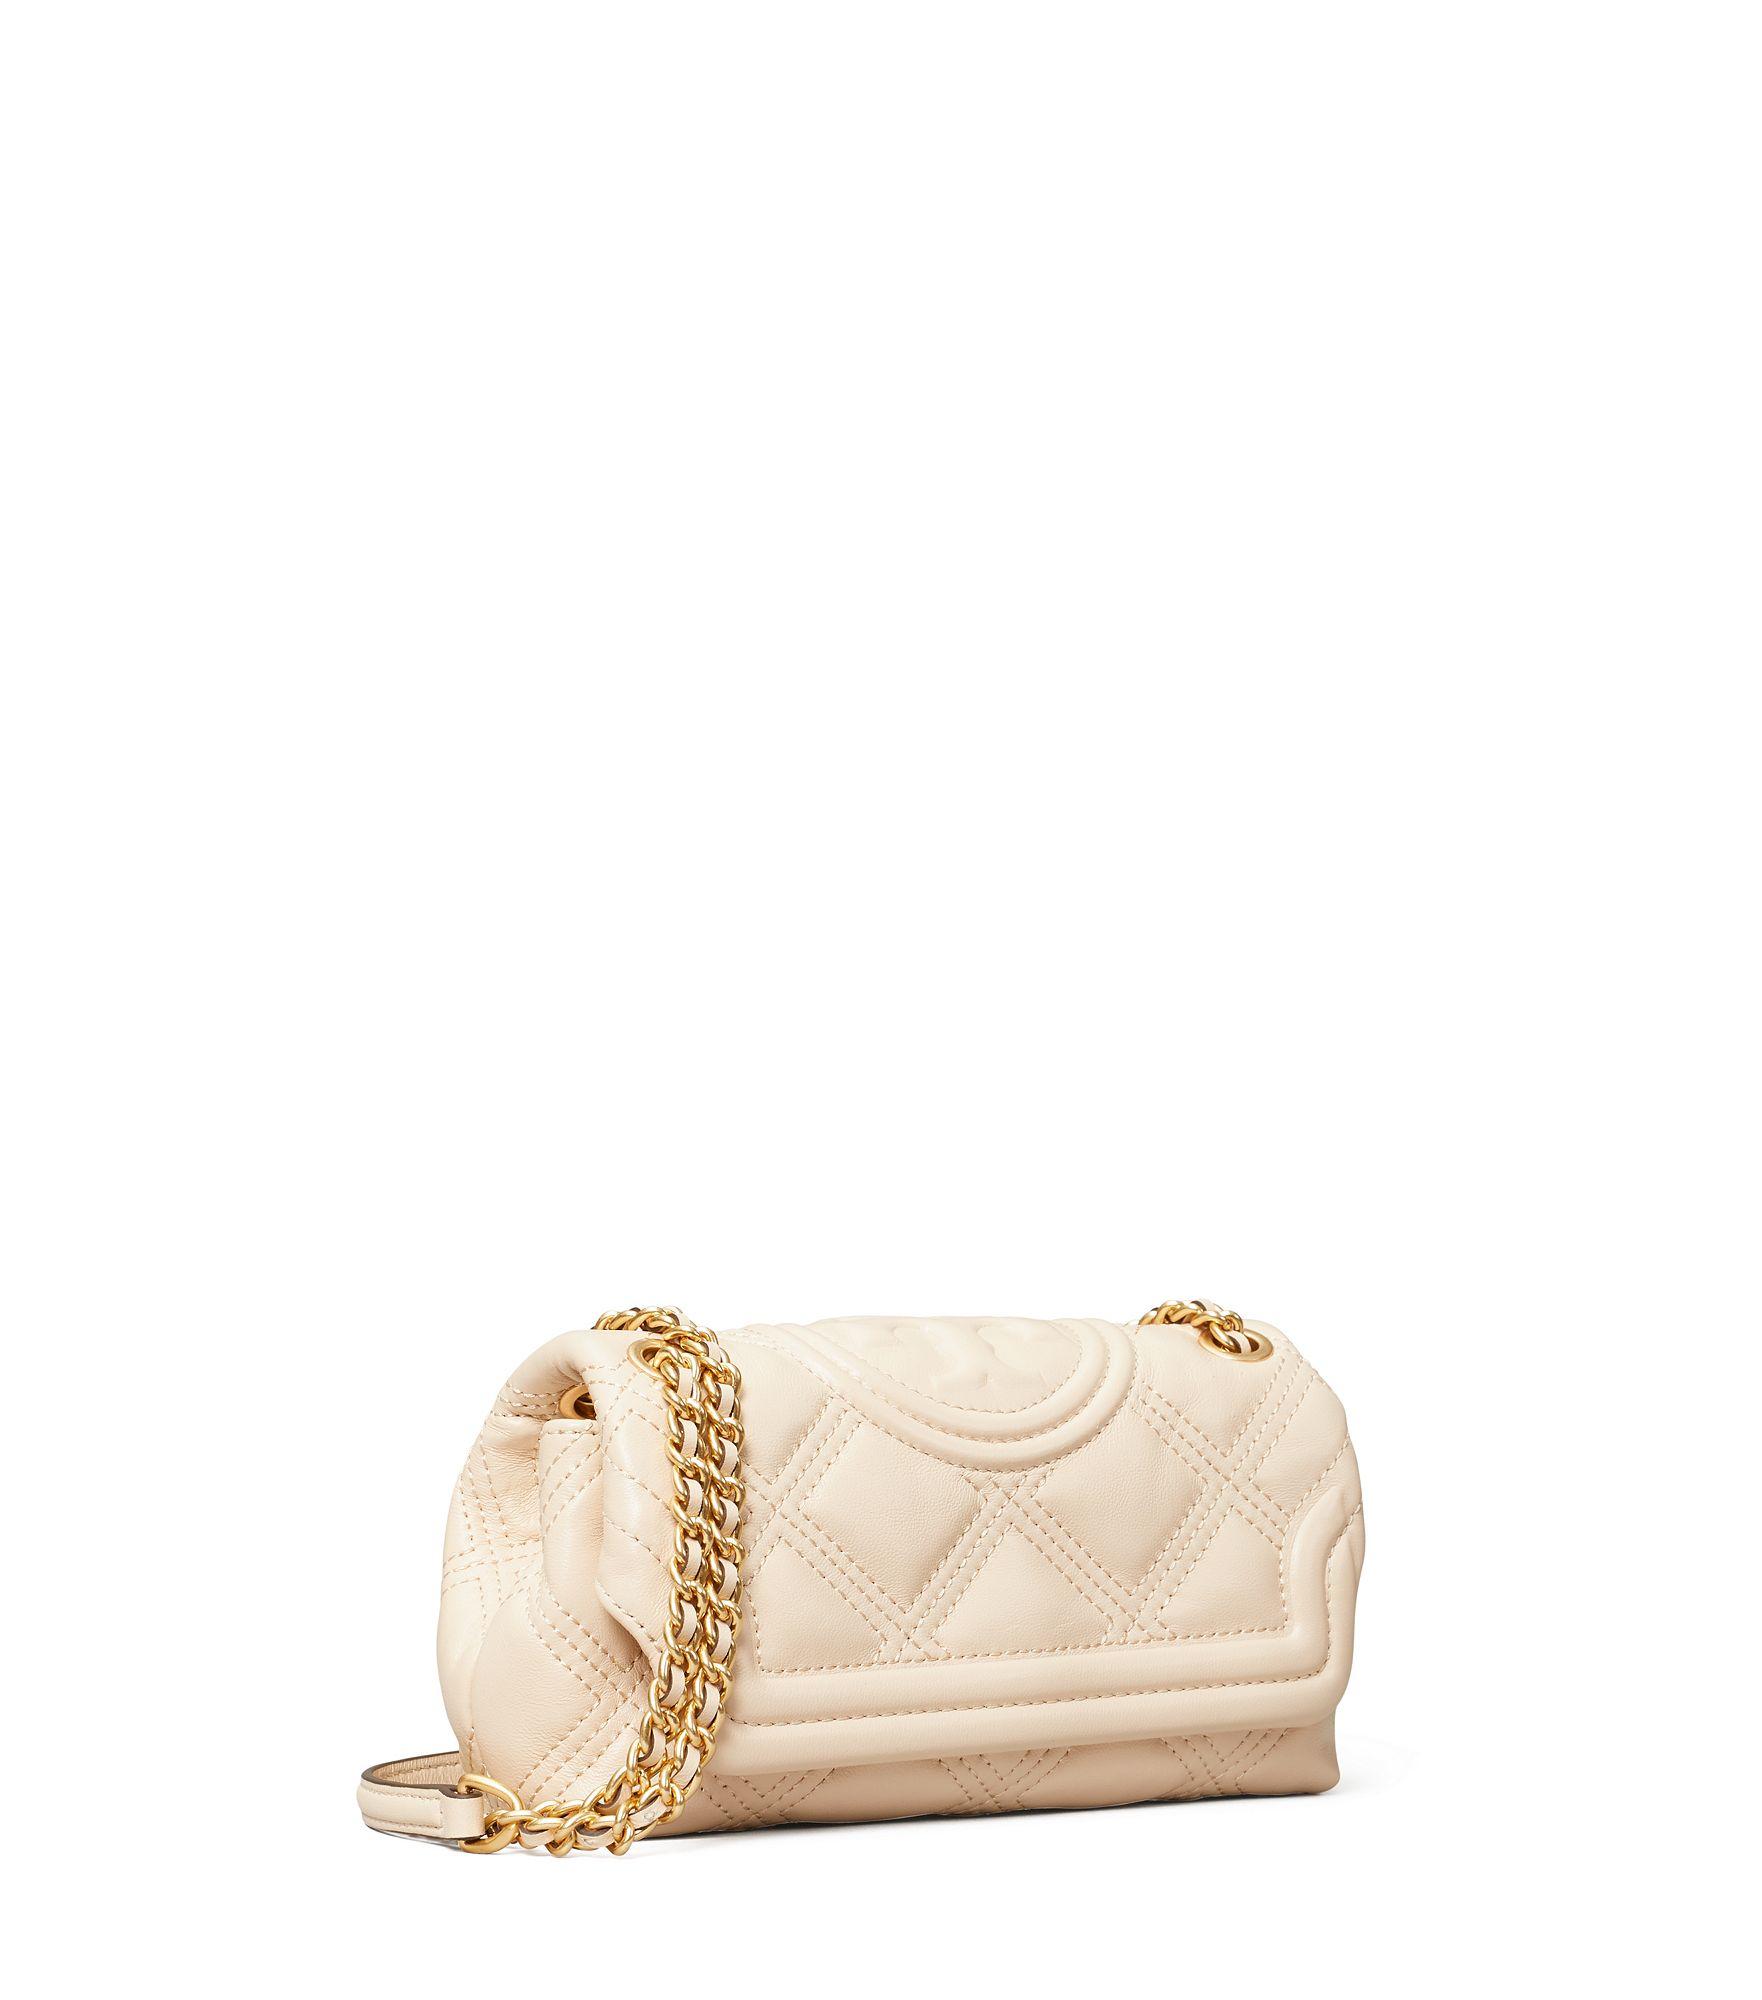 Buy Tory Burch Fleming Soft Convertible Shoulder Bag - Sycamore At 30% Off